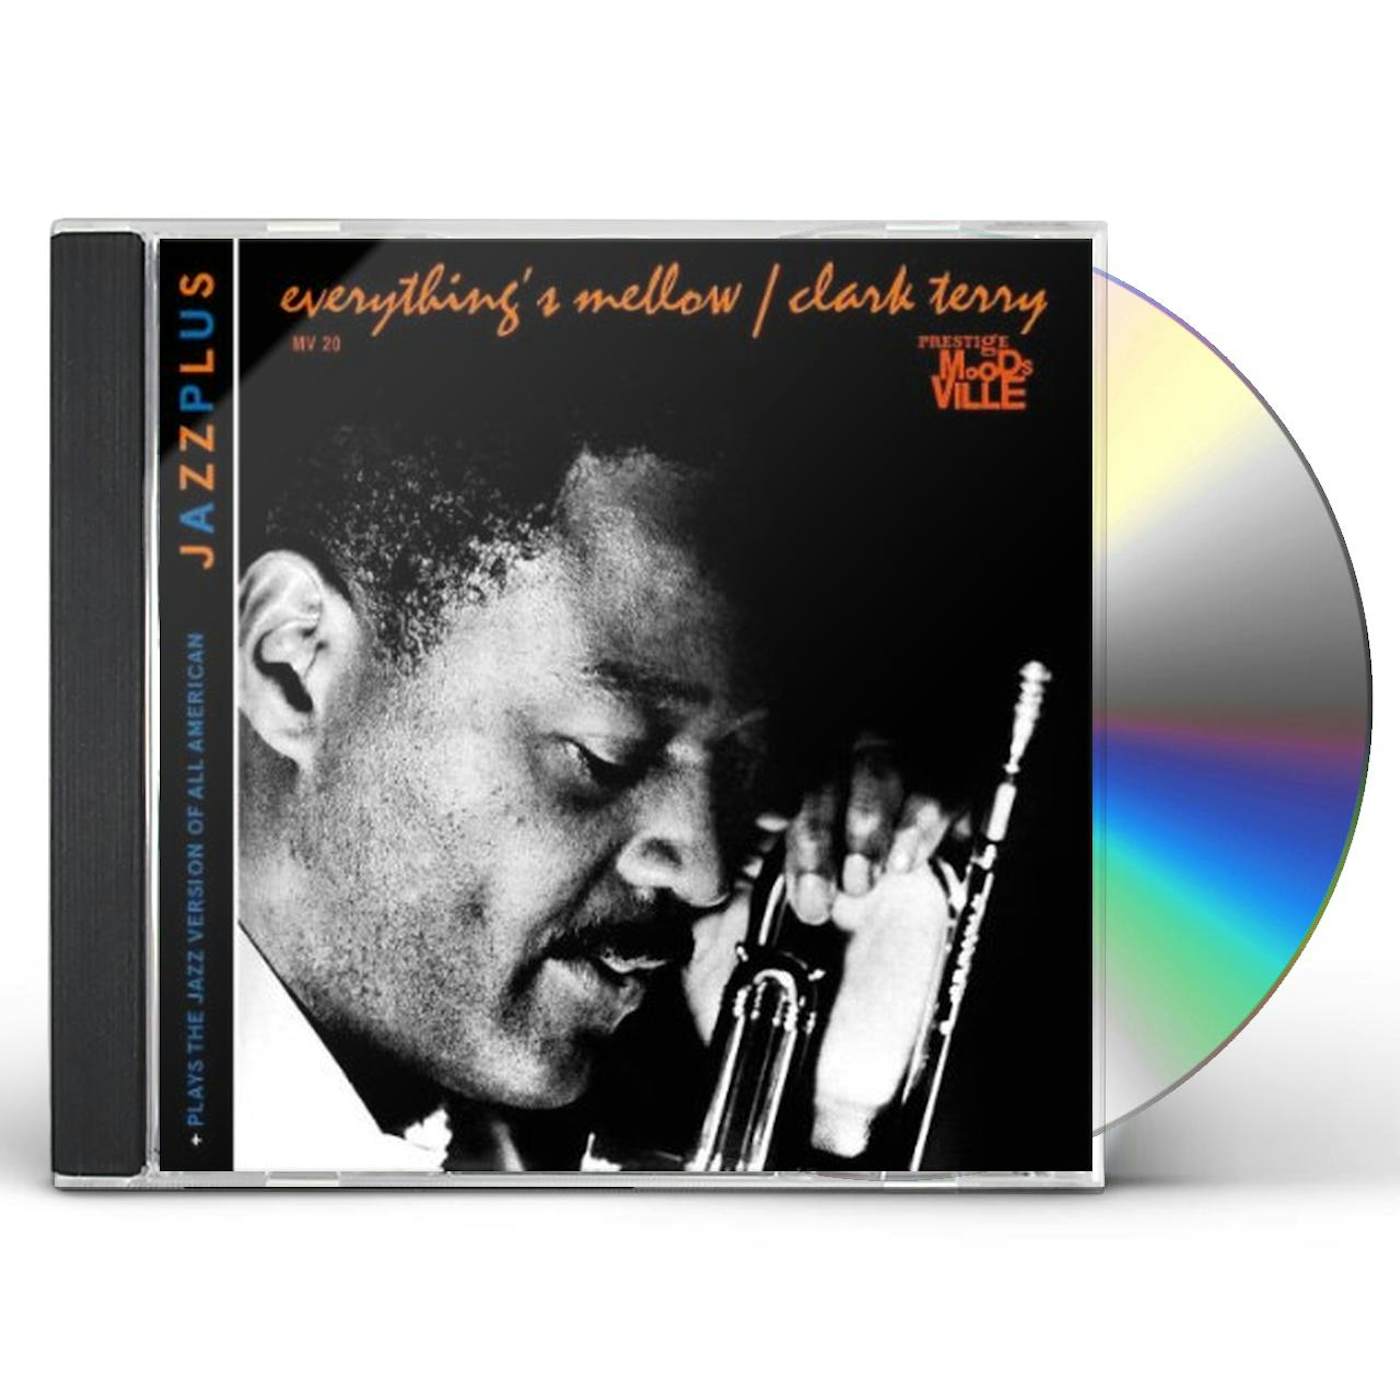 Clark Terry EVERYTHING'S MELLOW + PLAYS THE JAZZ VERSION CD